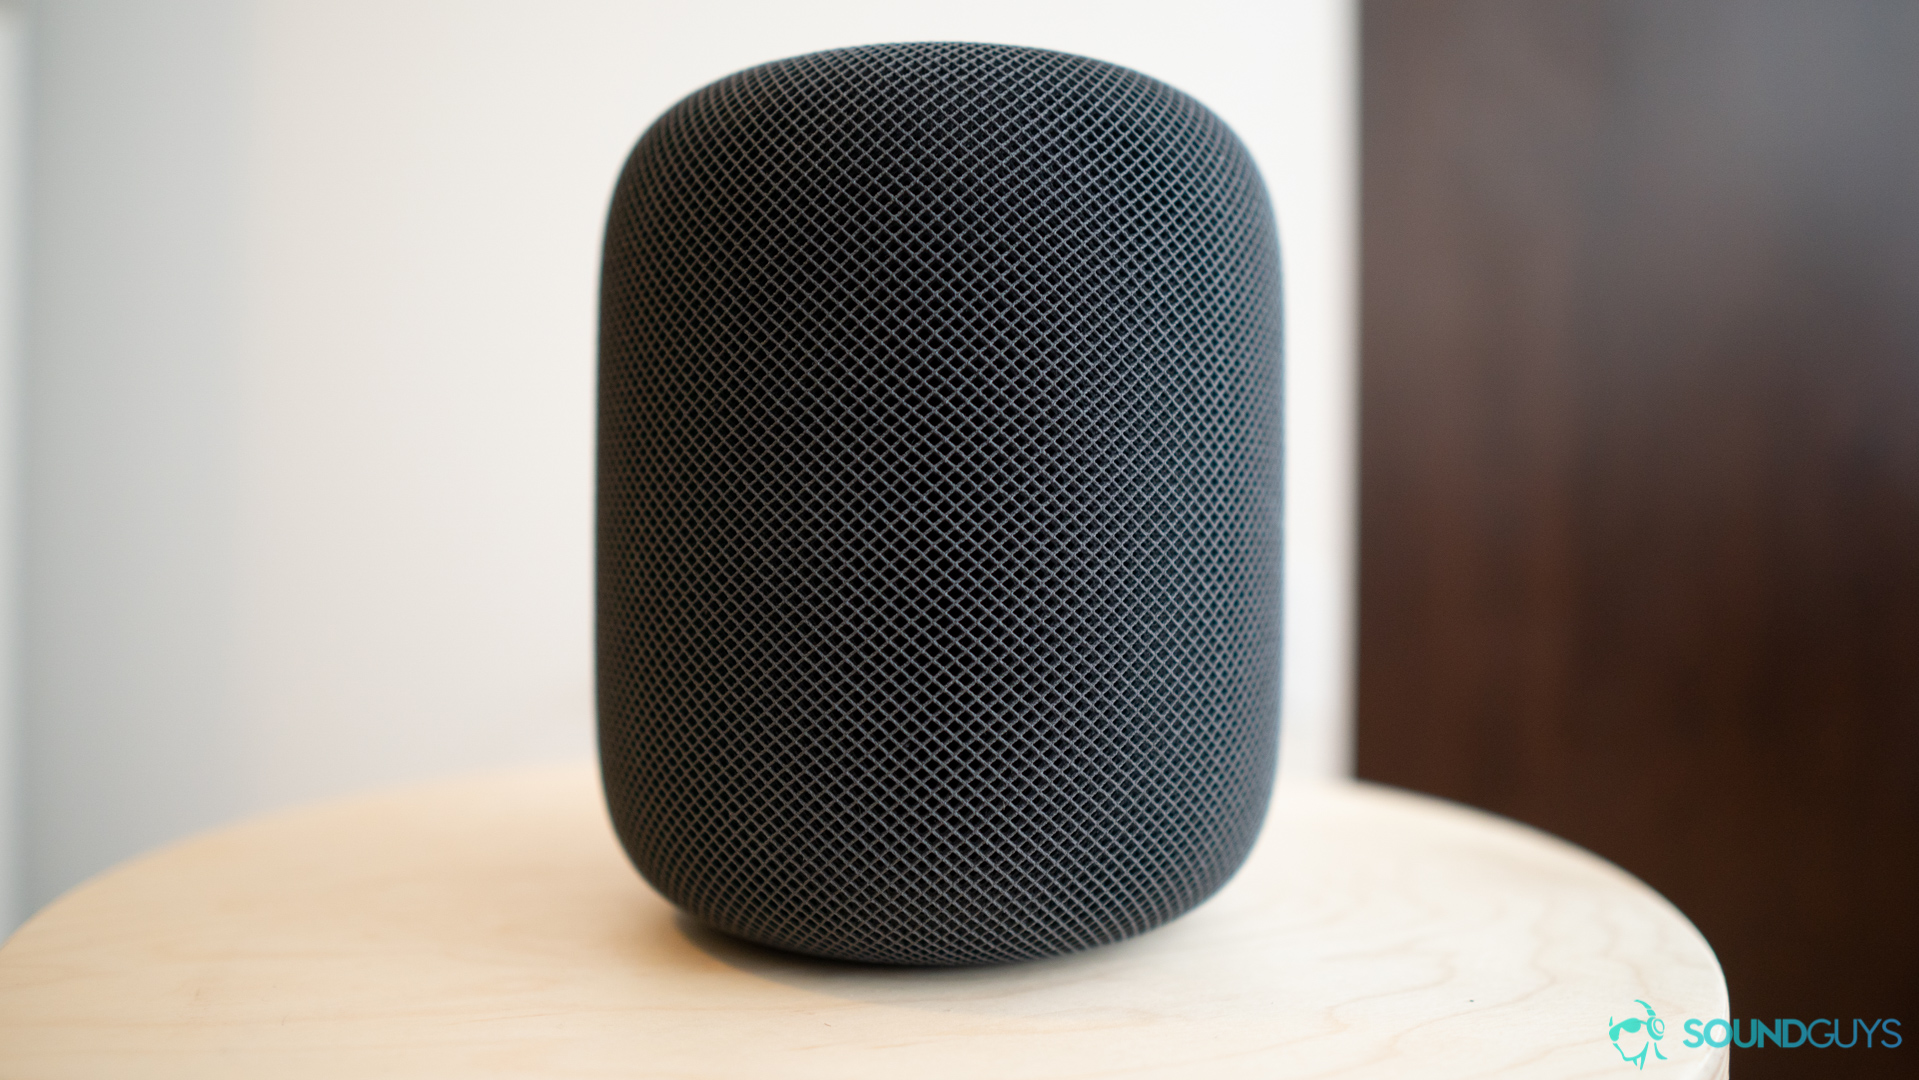 The black Apple Homepod on a wooden stool against a white wall. 